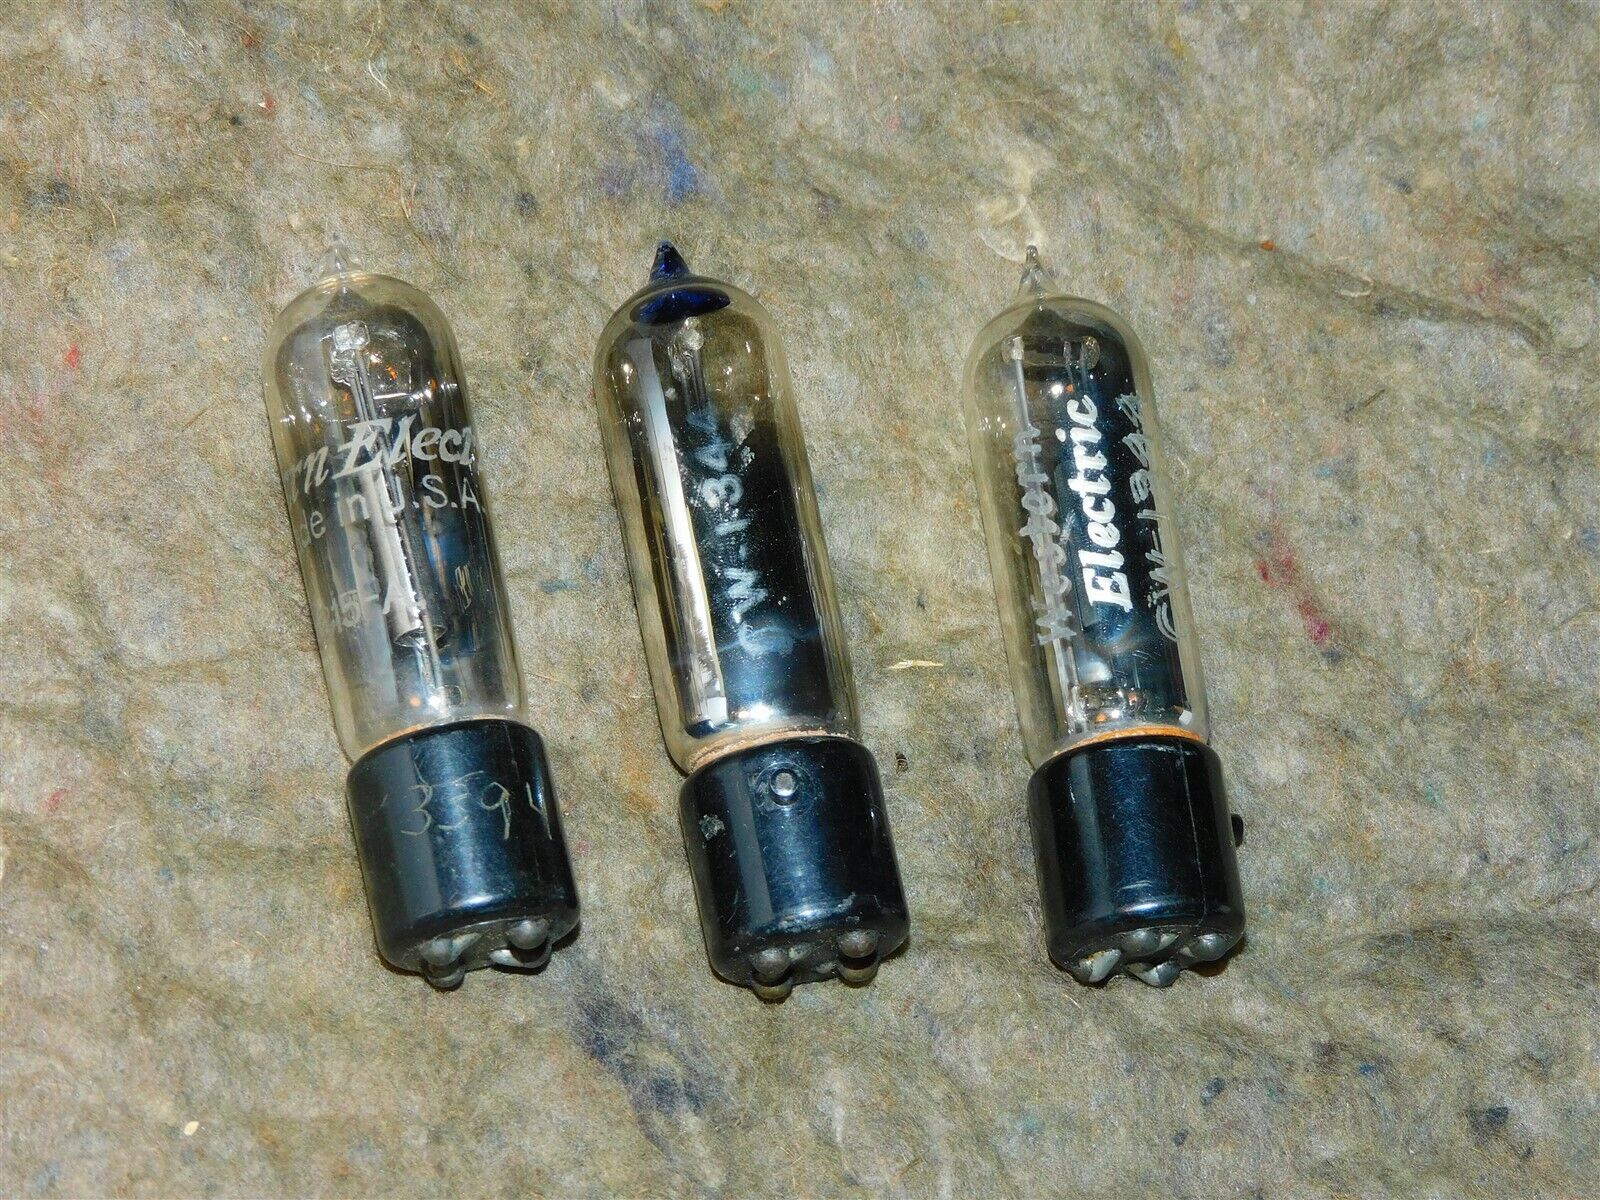 Western Electric CW-1344 212A 4215A Vacuum Tube 3 pieces in LOT # 51 Western Electric